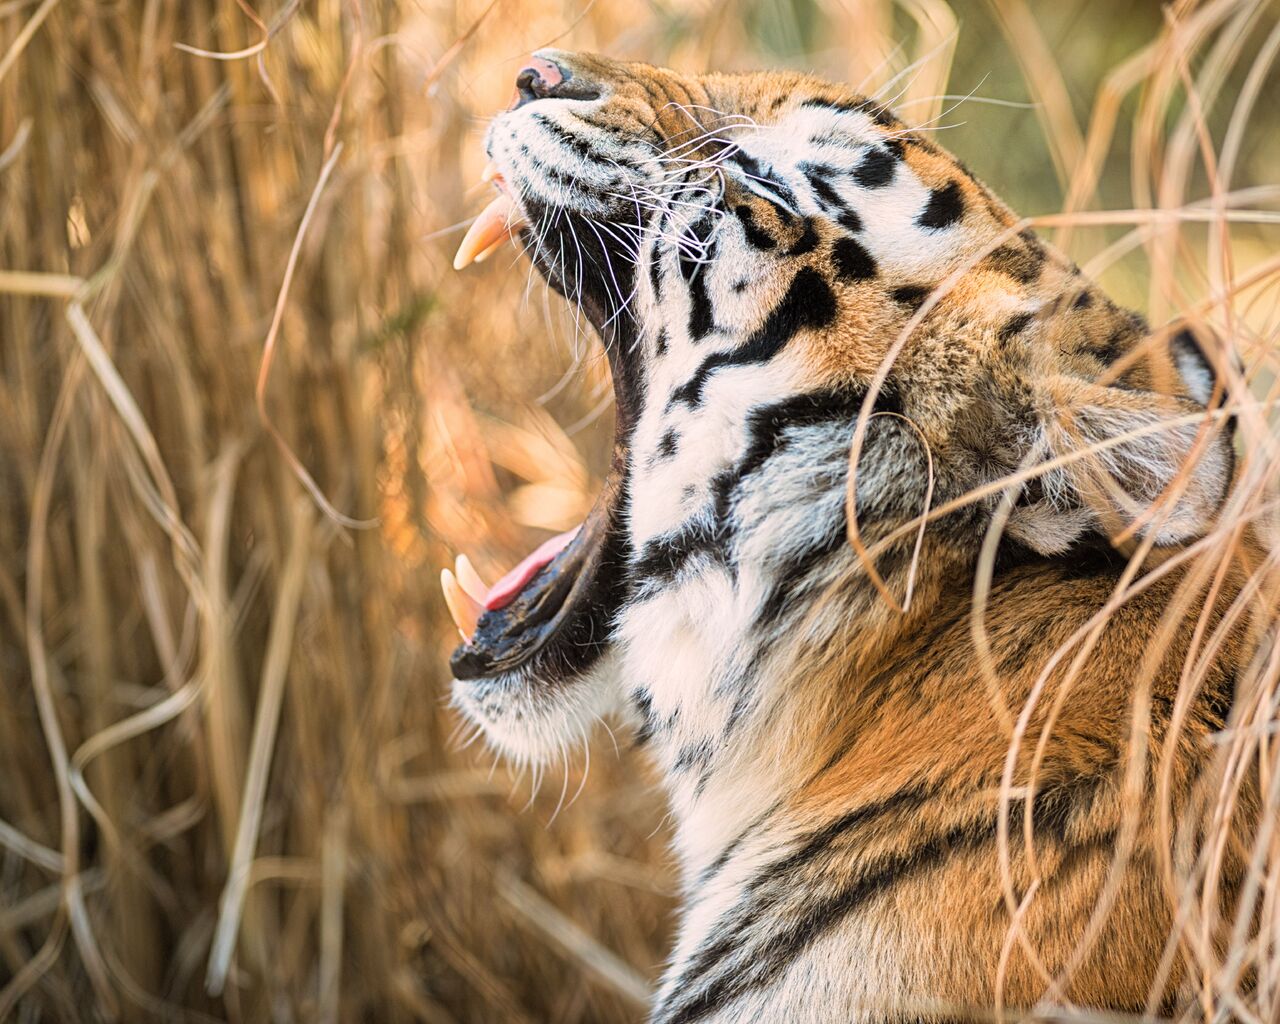 Tiger Open Mouth 8k 1280x1024 Resolution HD 4k Wallpaper, Image, Background, Photo and Picture